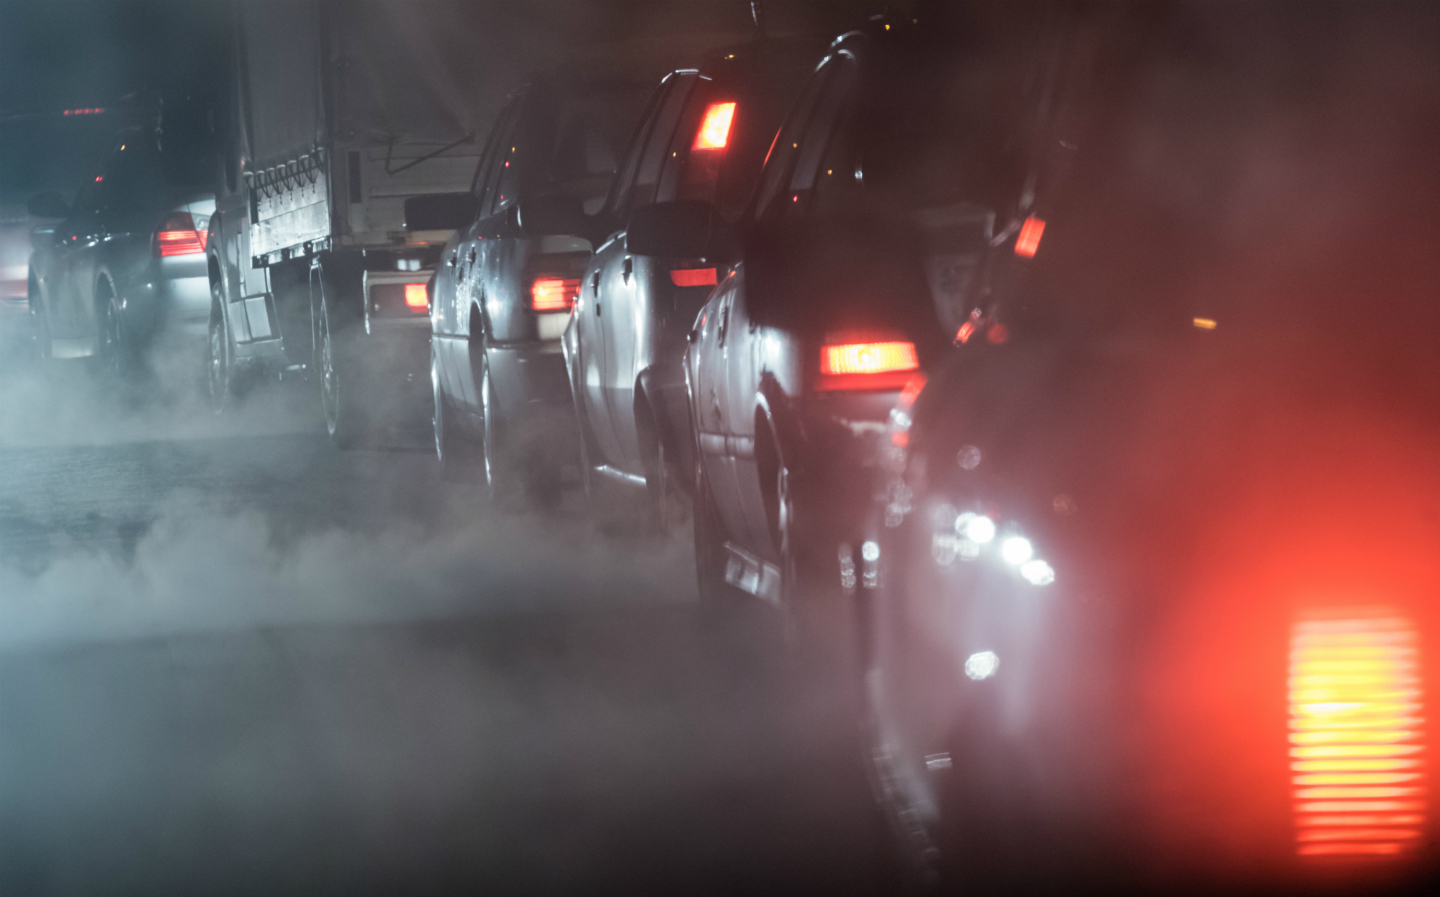 Drivers of polluting cars could be paid £1,000 to go green